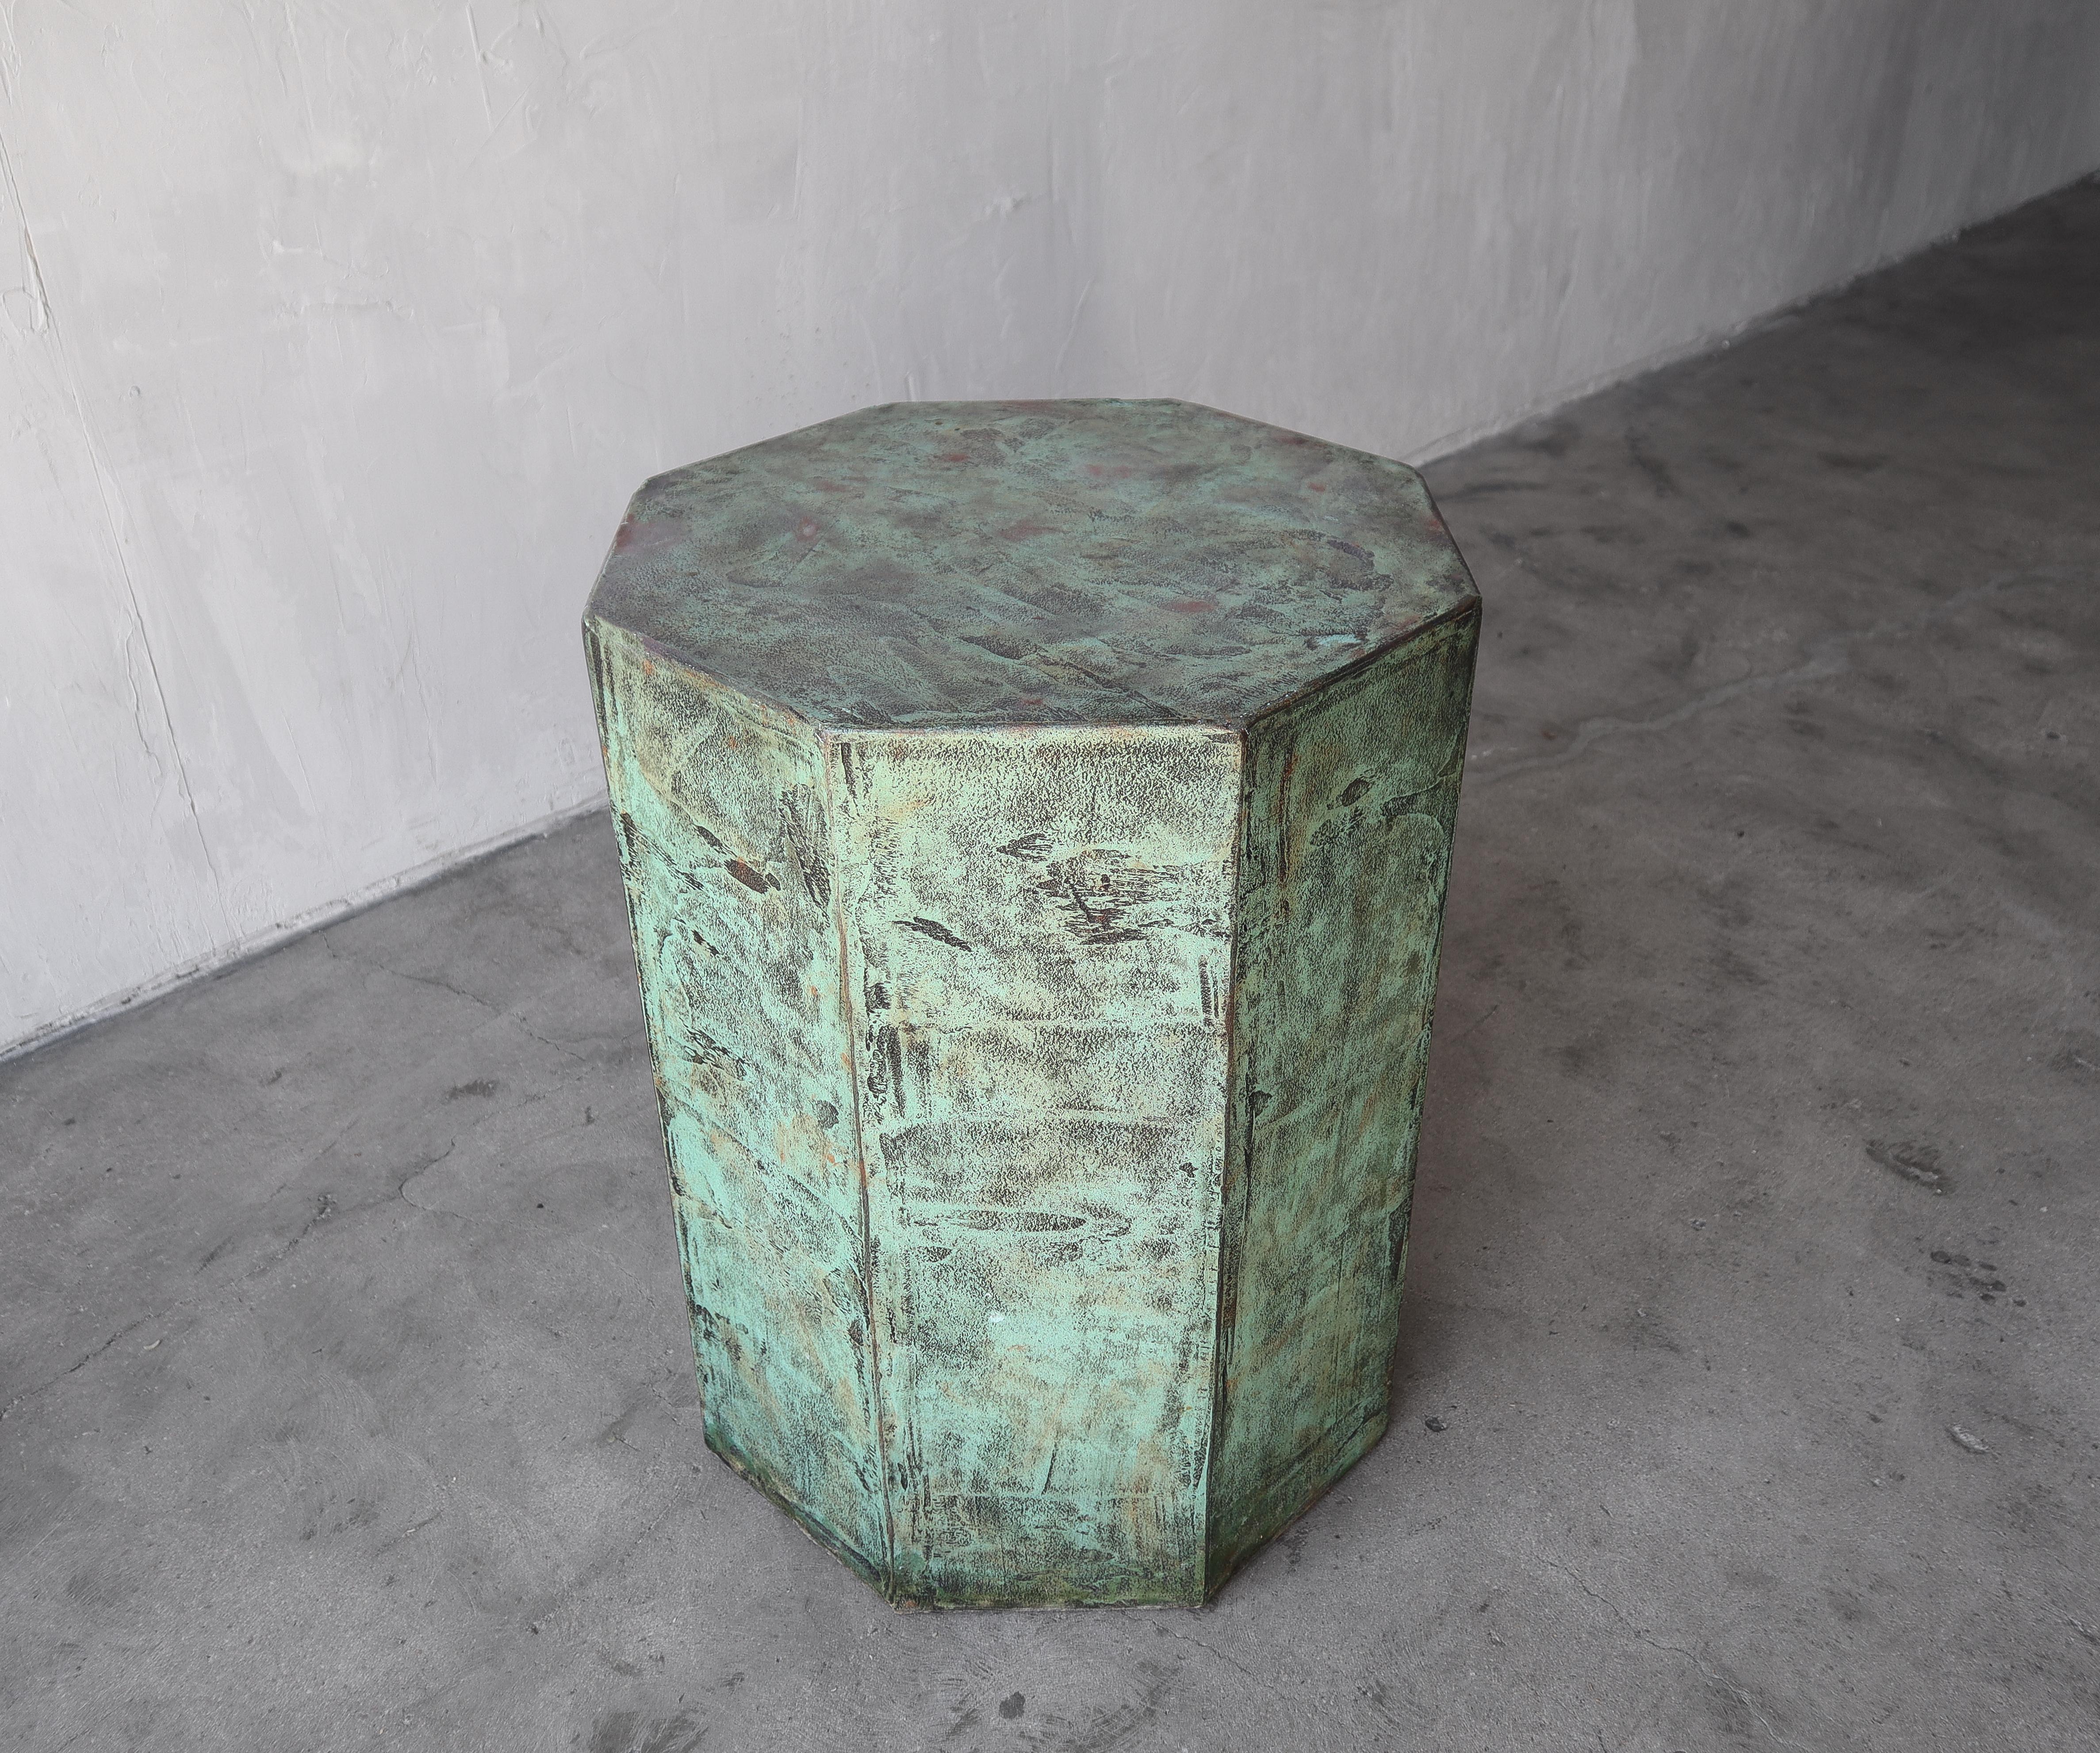 Unique octagonal pedestal, plaster over wood, faux finished to look like verdigris copper.  Can be used as a table base or oversized pedestal.

Base is in overall excellent vintage condition, with only very minimal wear from age and use.
